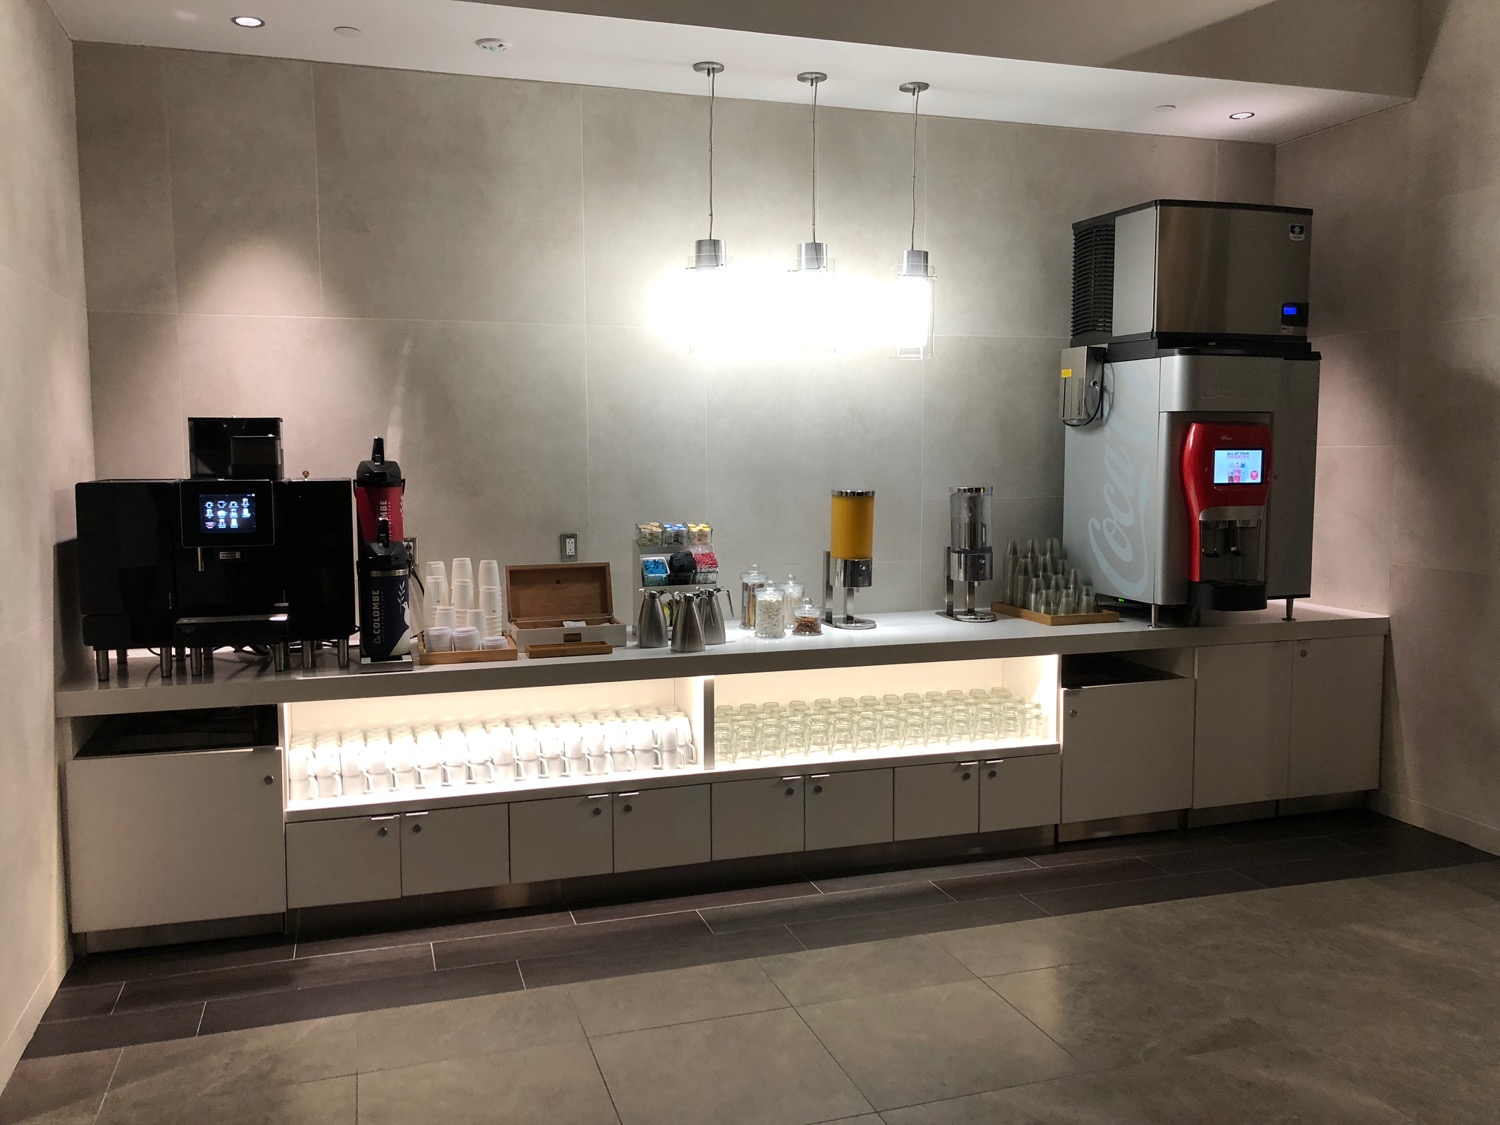 a counter with drinks and beverages on it